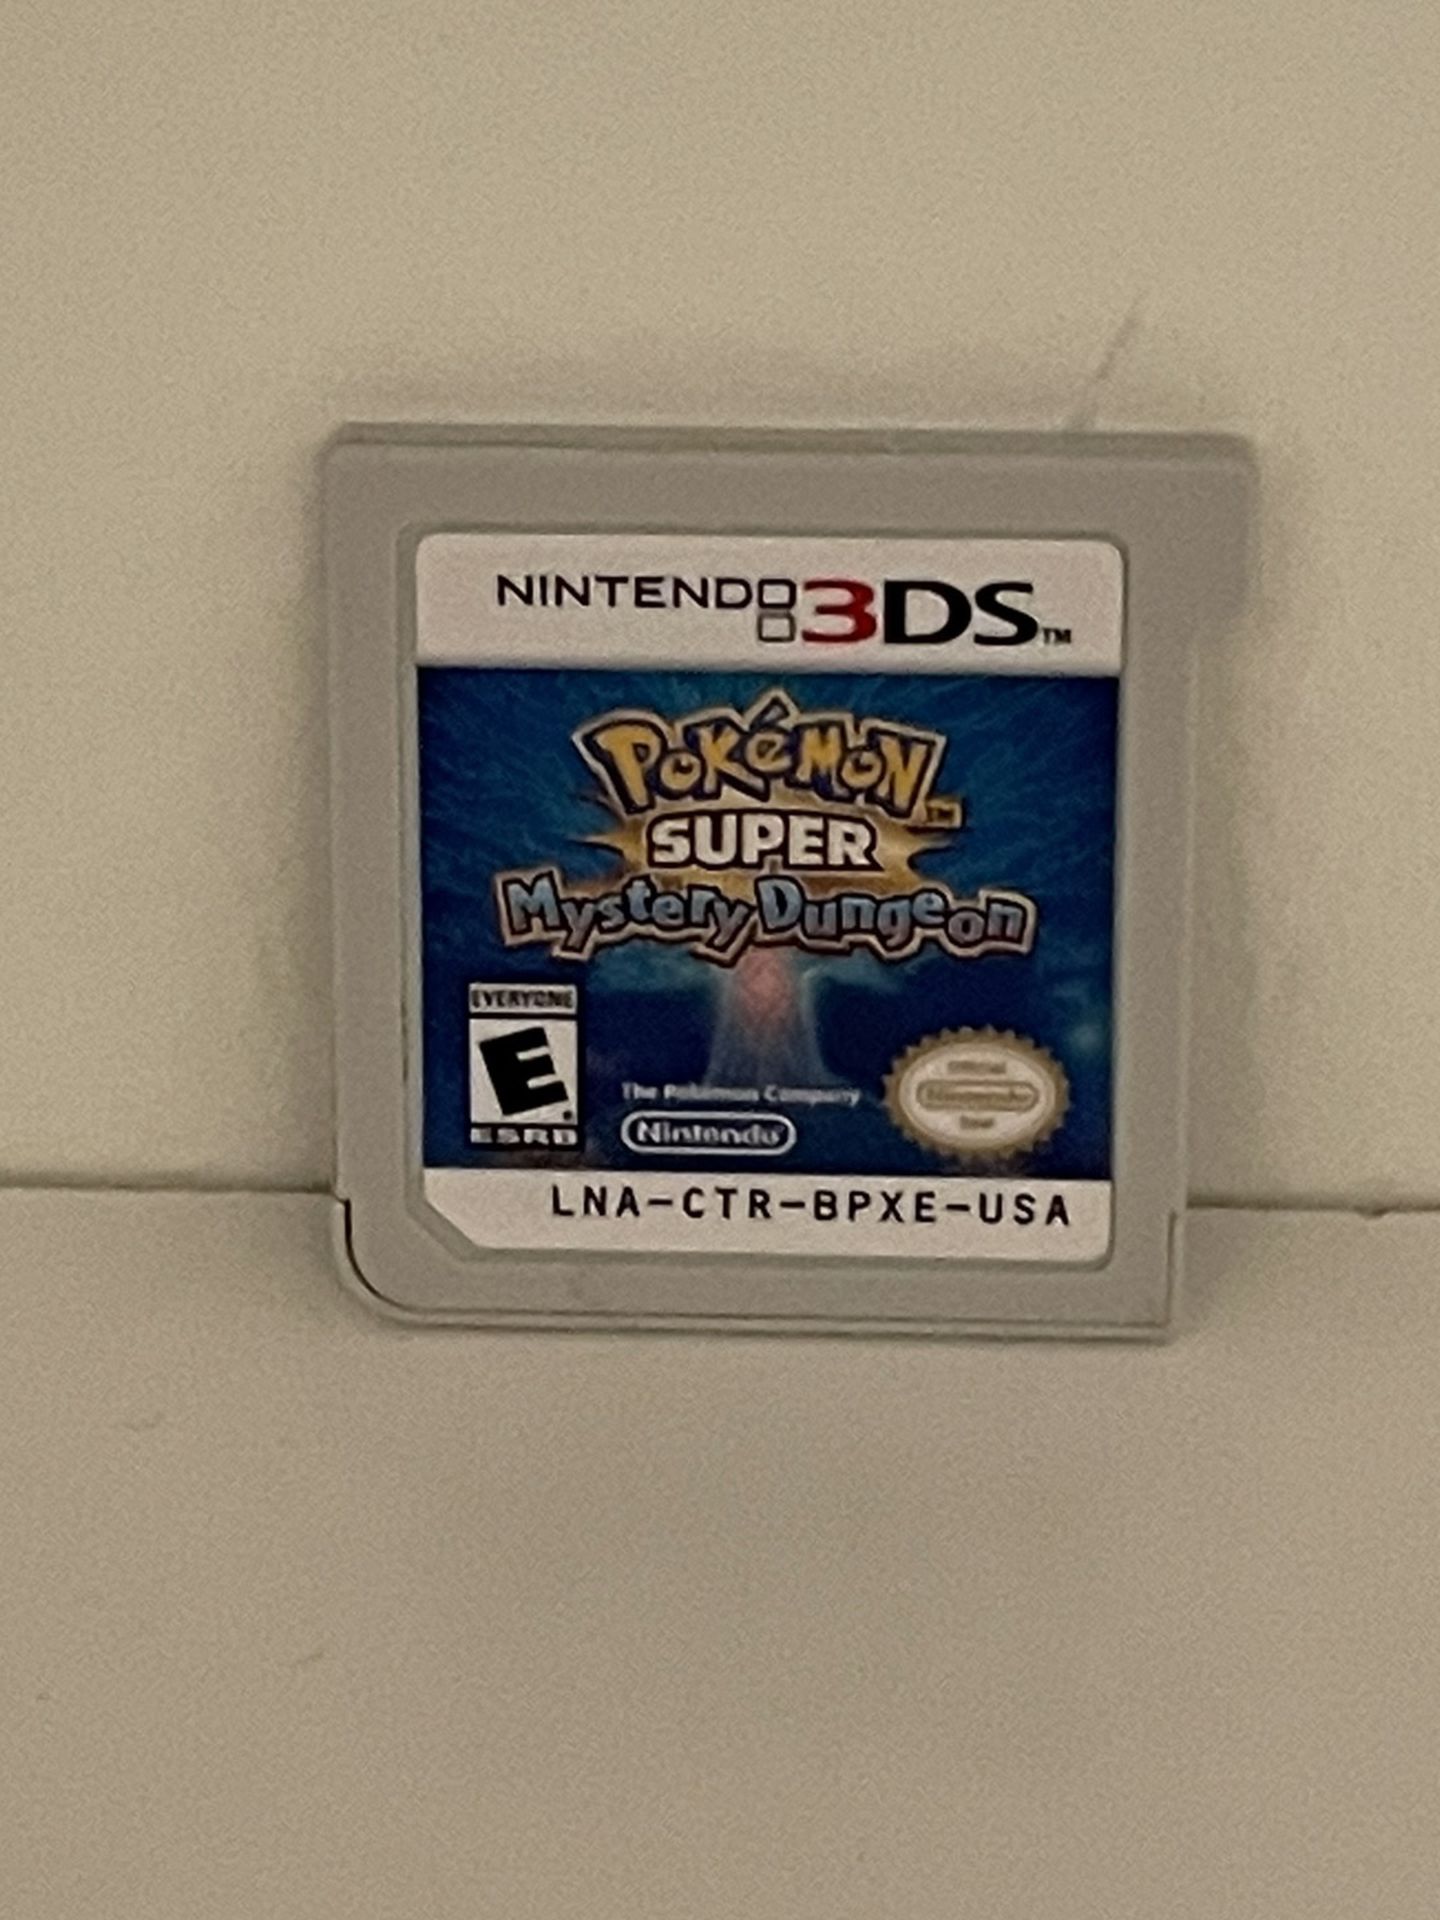 Pokemon Super Mystery Dungeon (Nintendo 3DS)—Authentic, Tested and Working